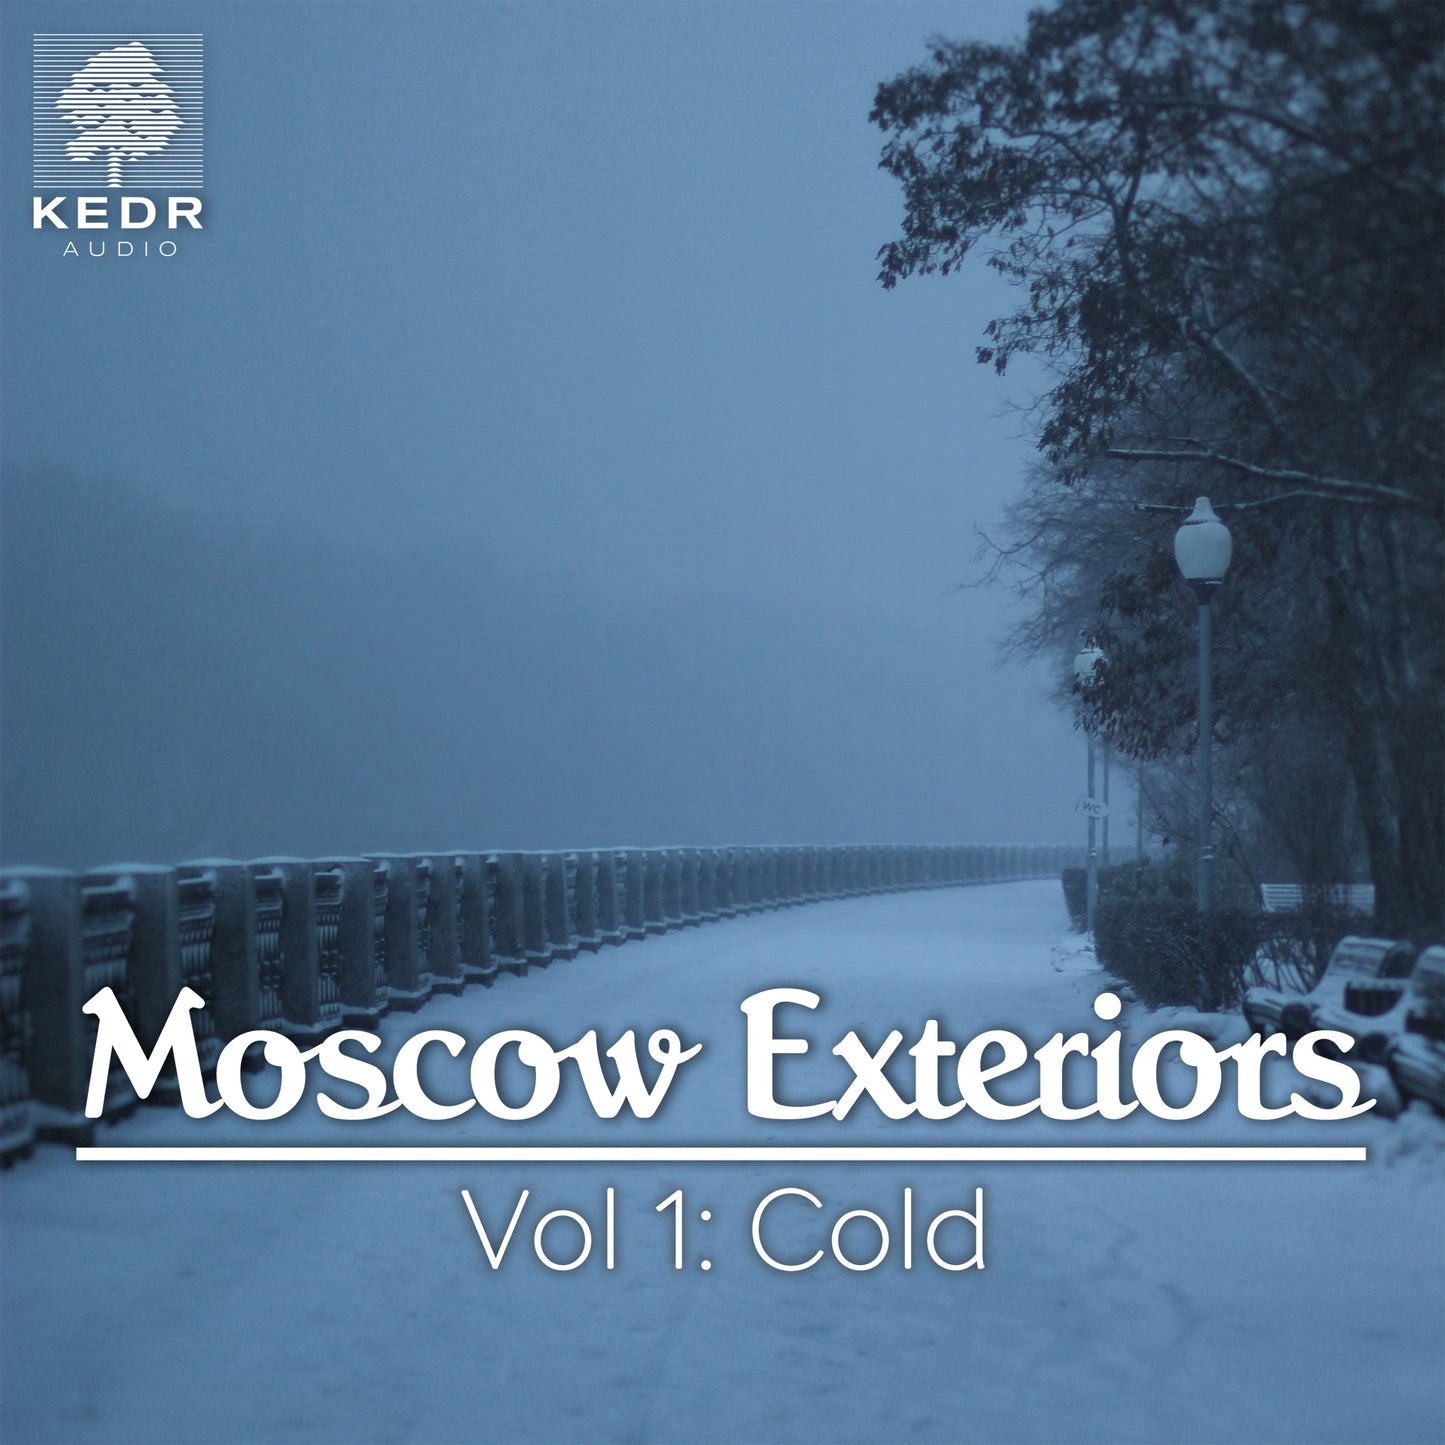 Moscow Exteriors Vol 1: Cold